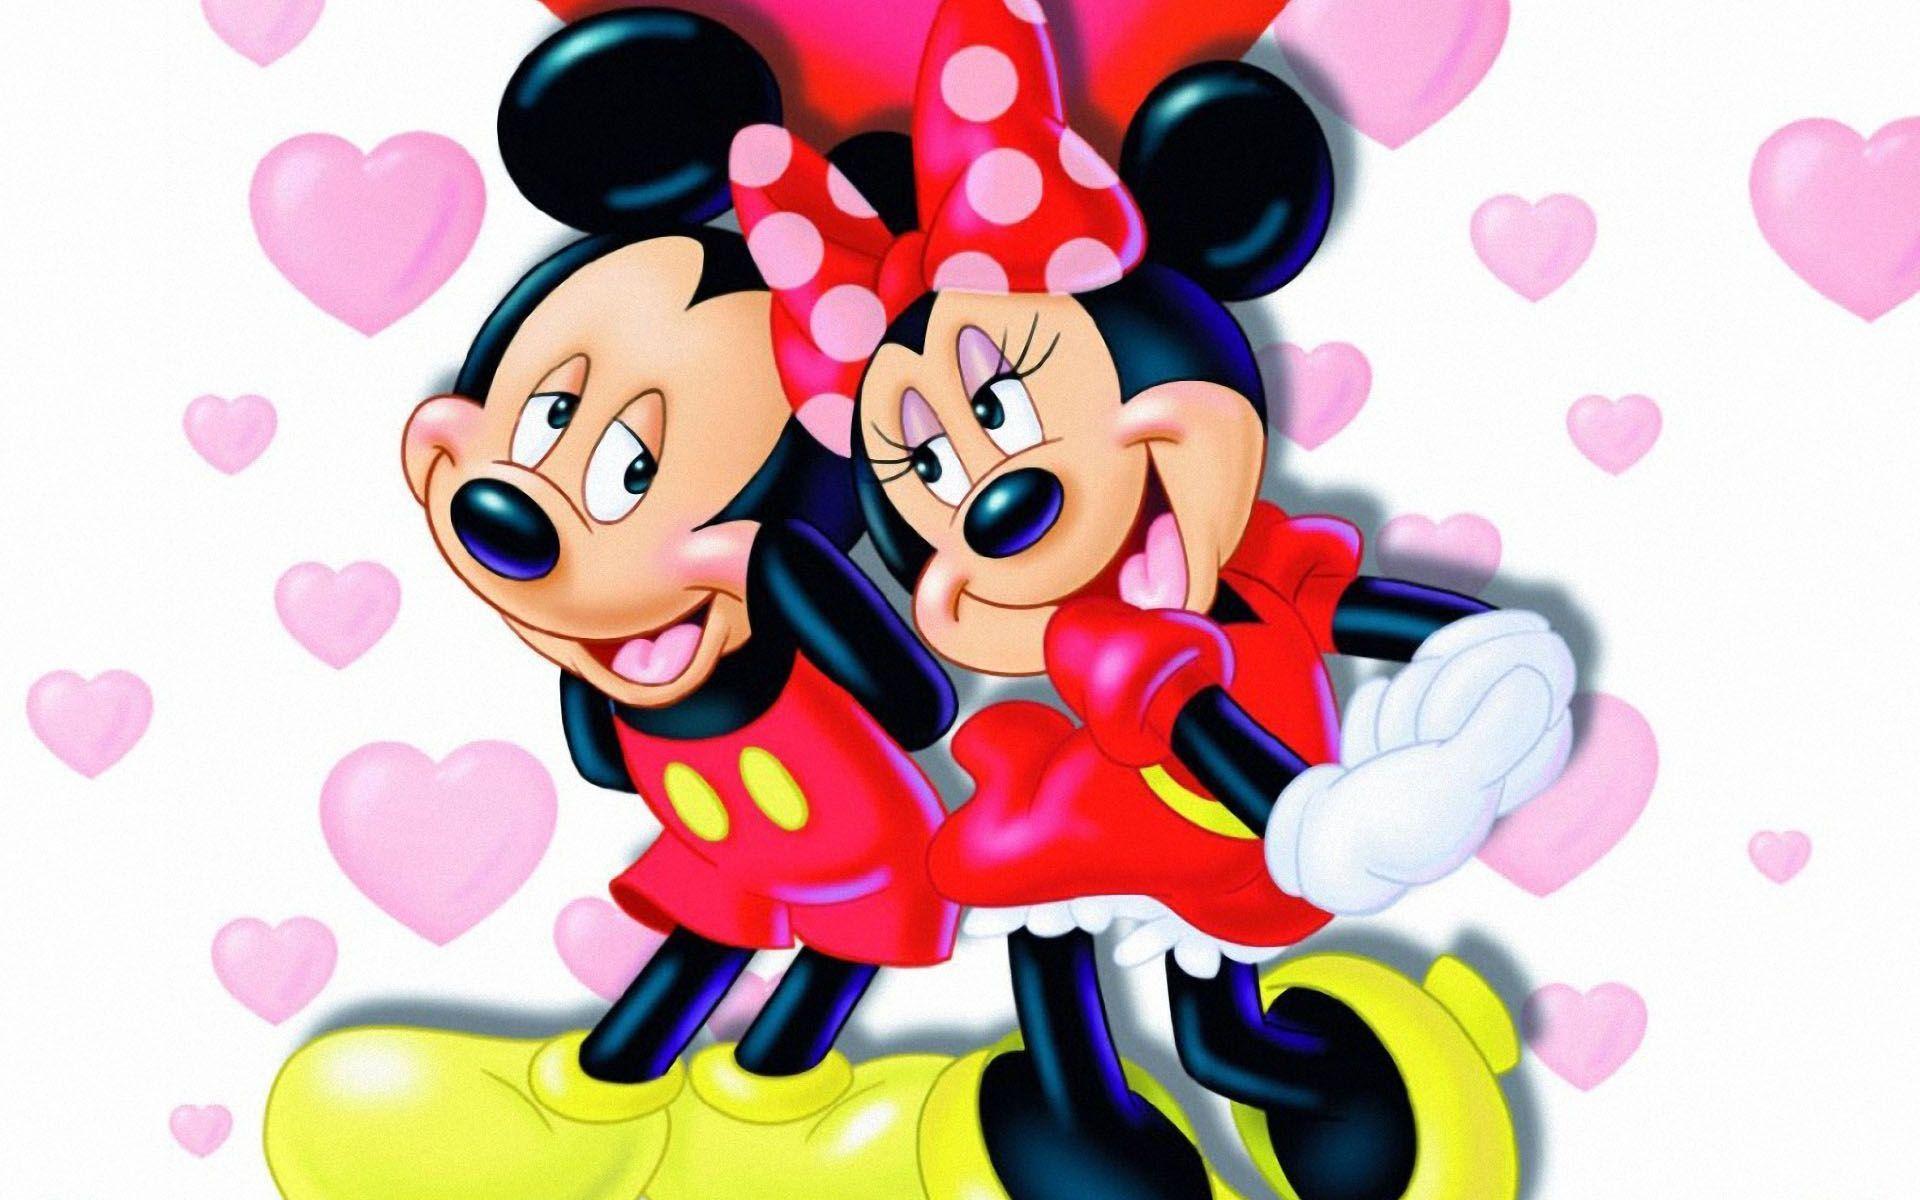 1920x1200 Mickey Mouse and Minnie in Love Wallpaper - Top Free Mickey Mouse on WallpaperBat